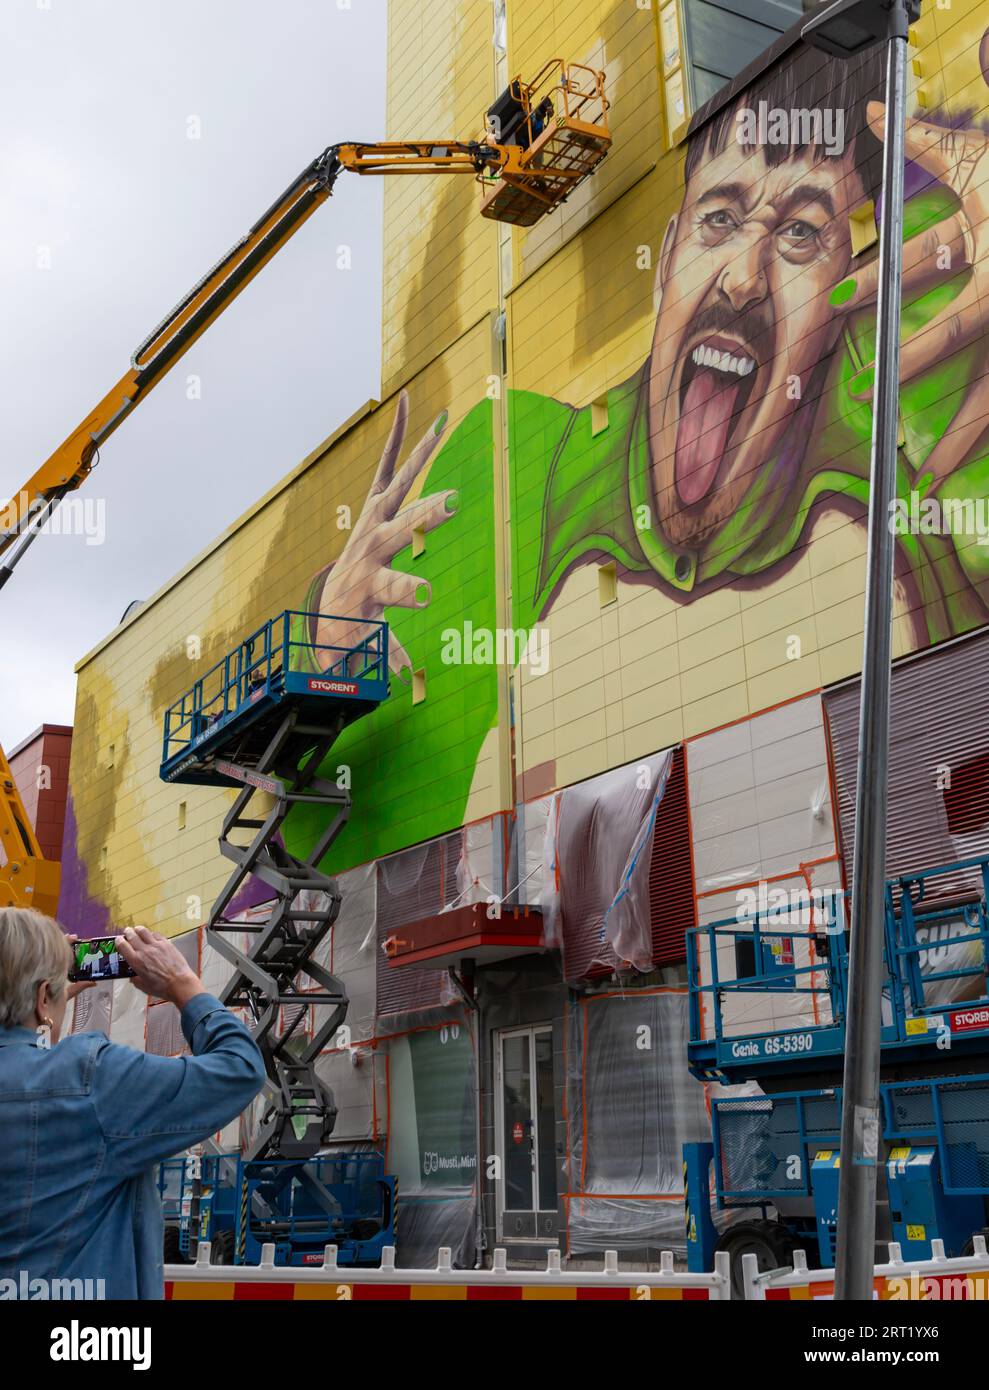 A mural depicting Käärijä being painted, from aerial work platforms, on a Prisma hypermarket wall in Tikkurila. A bypasser is taking a picture. Stock Photo